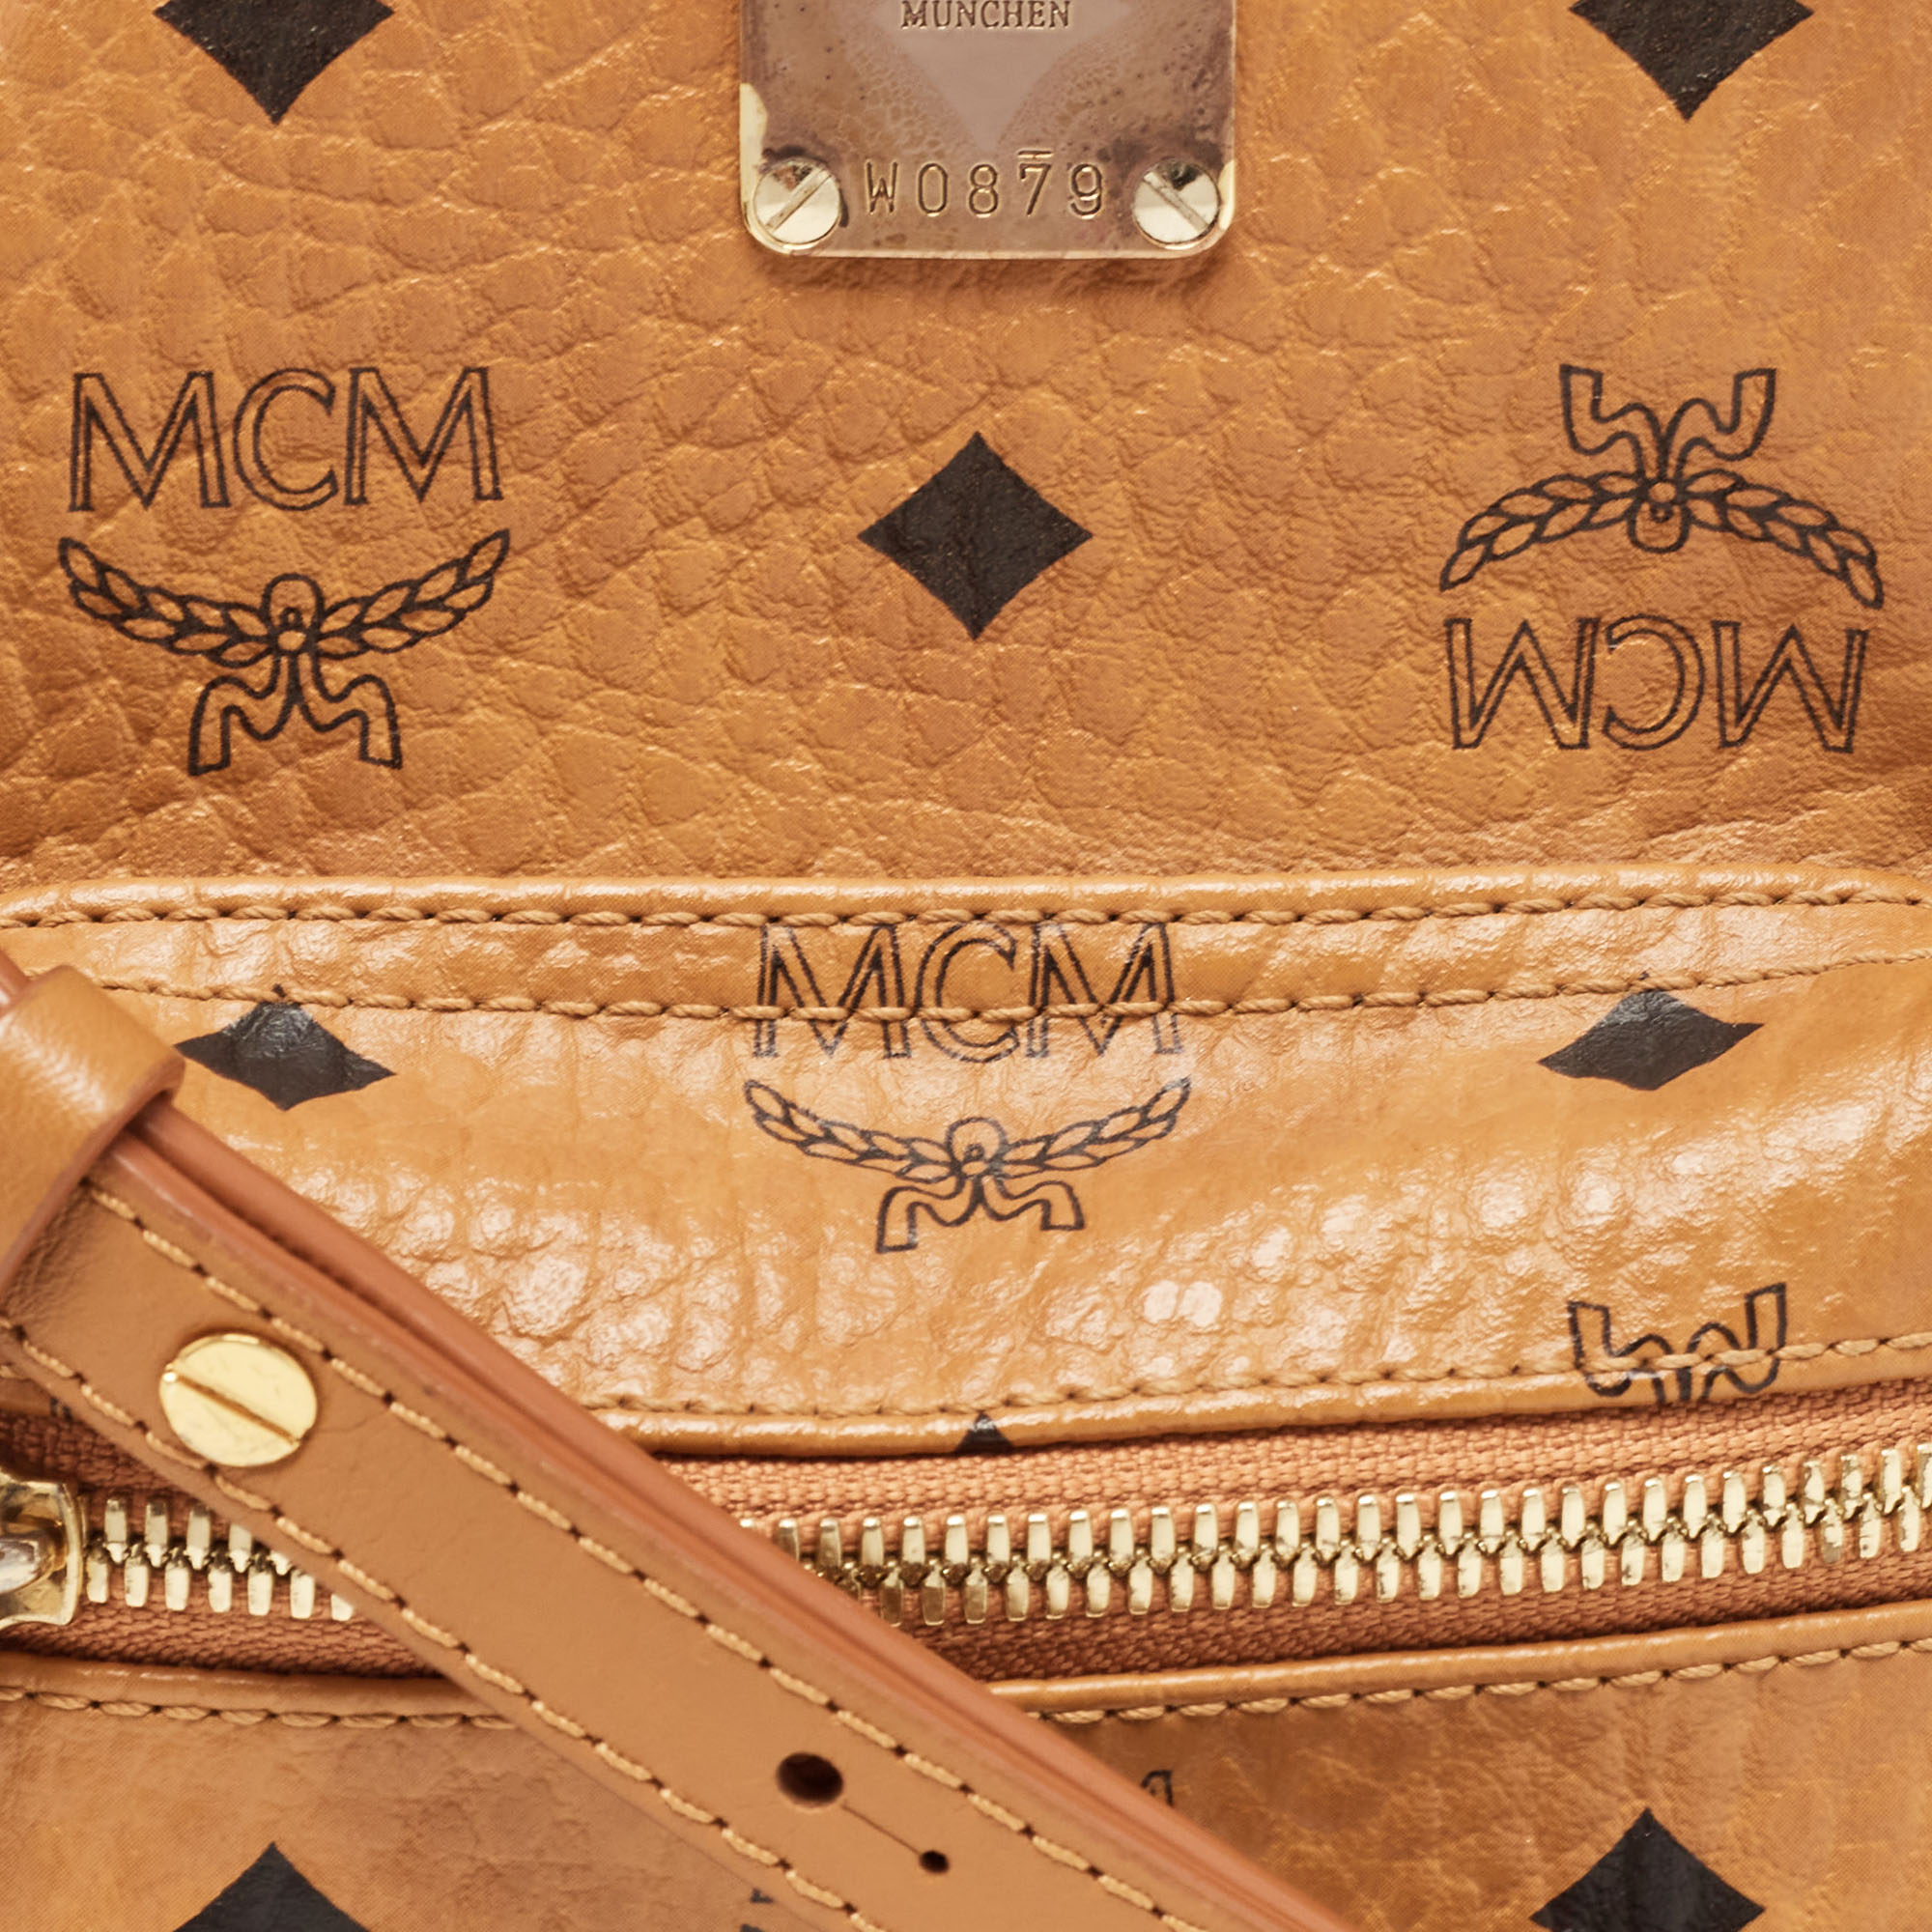 MCM Cognac Visetos Coated Canvas And Leather Mini Studded Stark-Bebe Boo Backpack